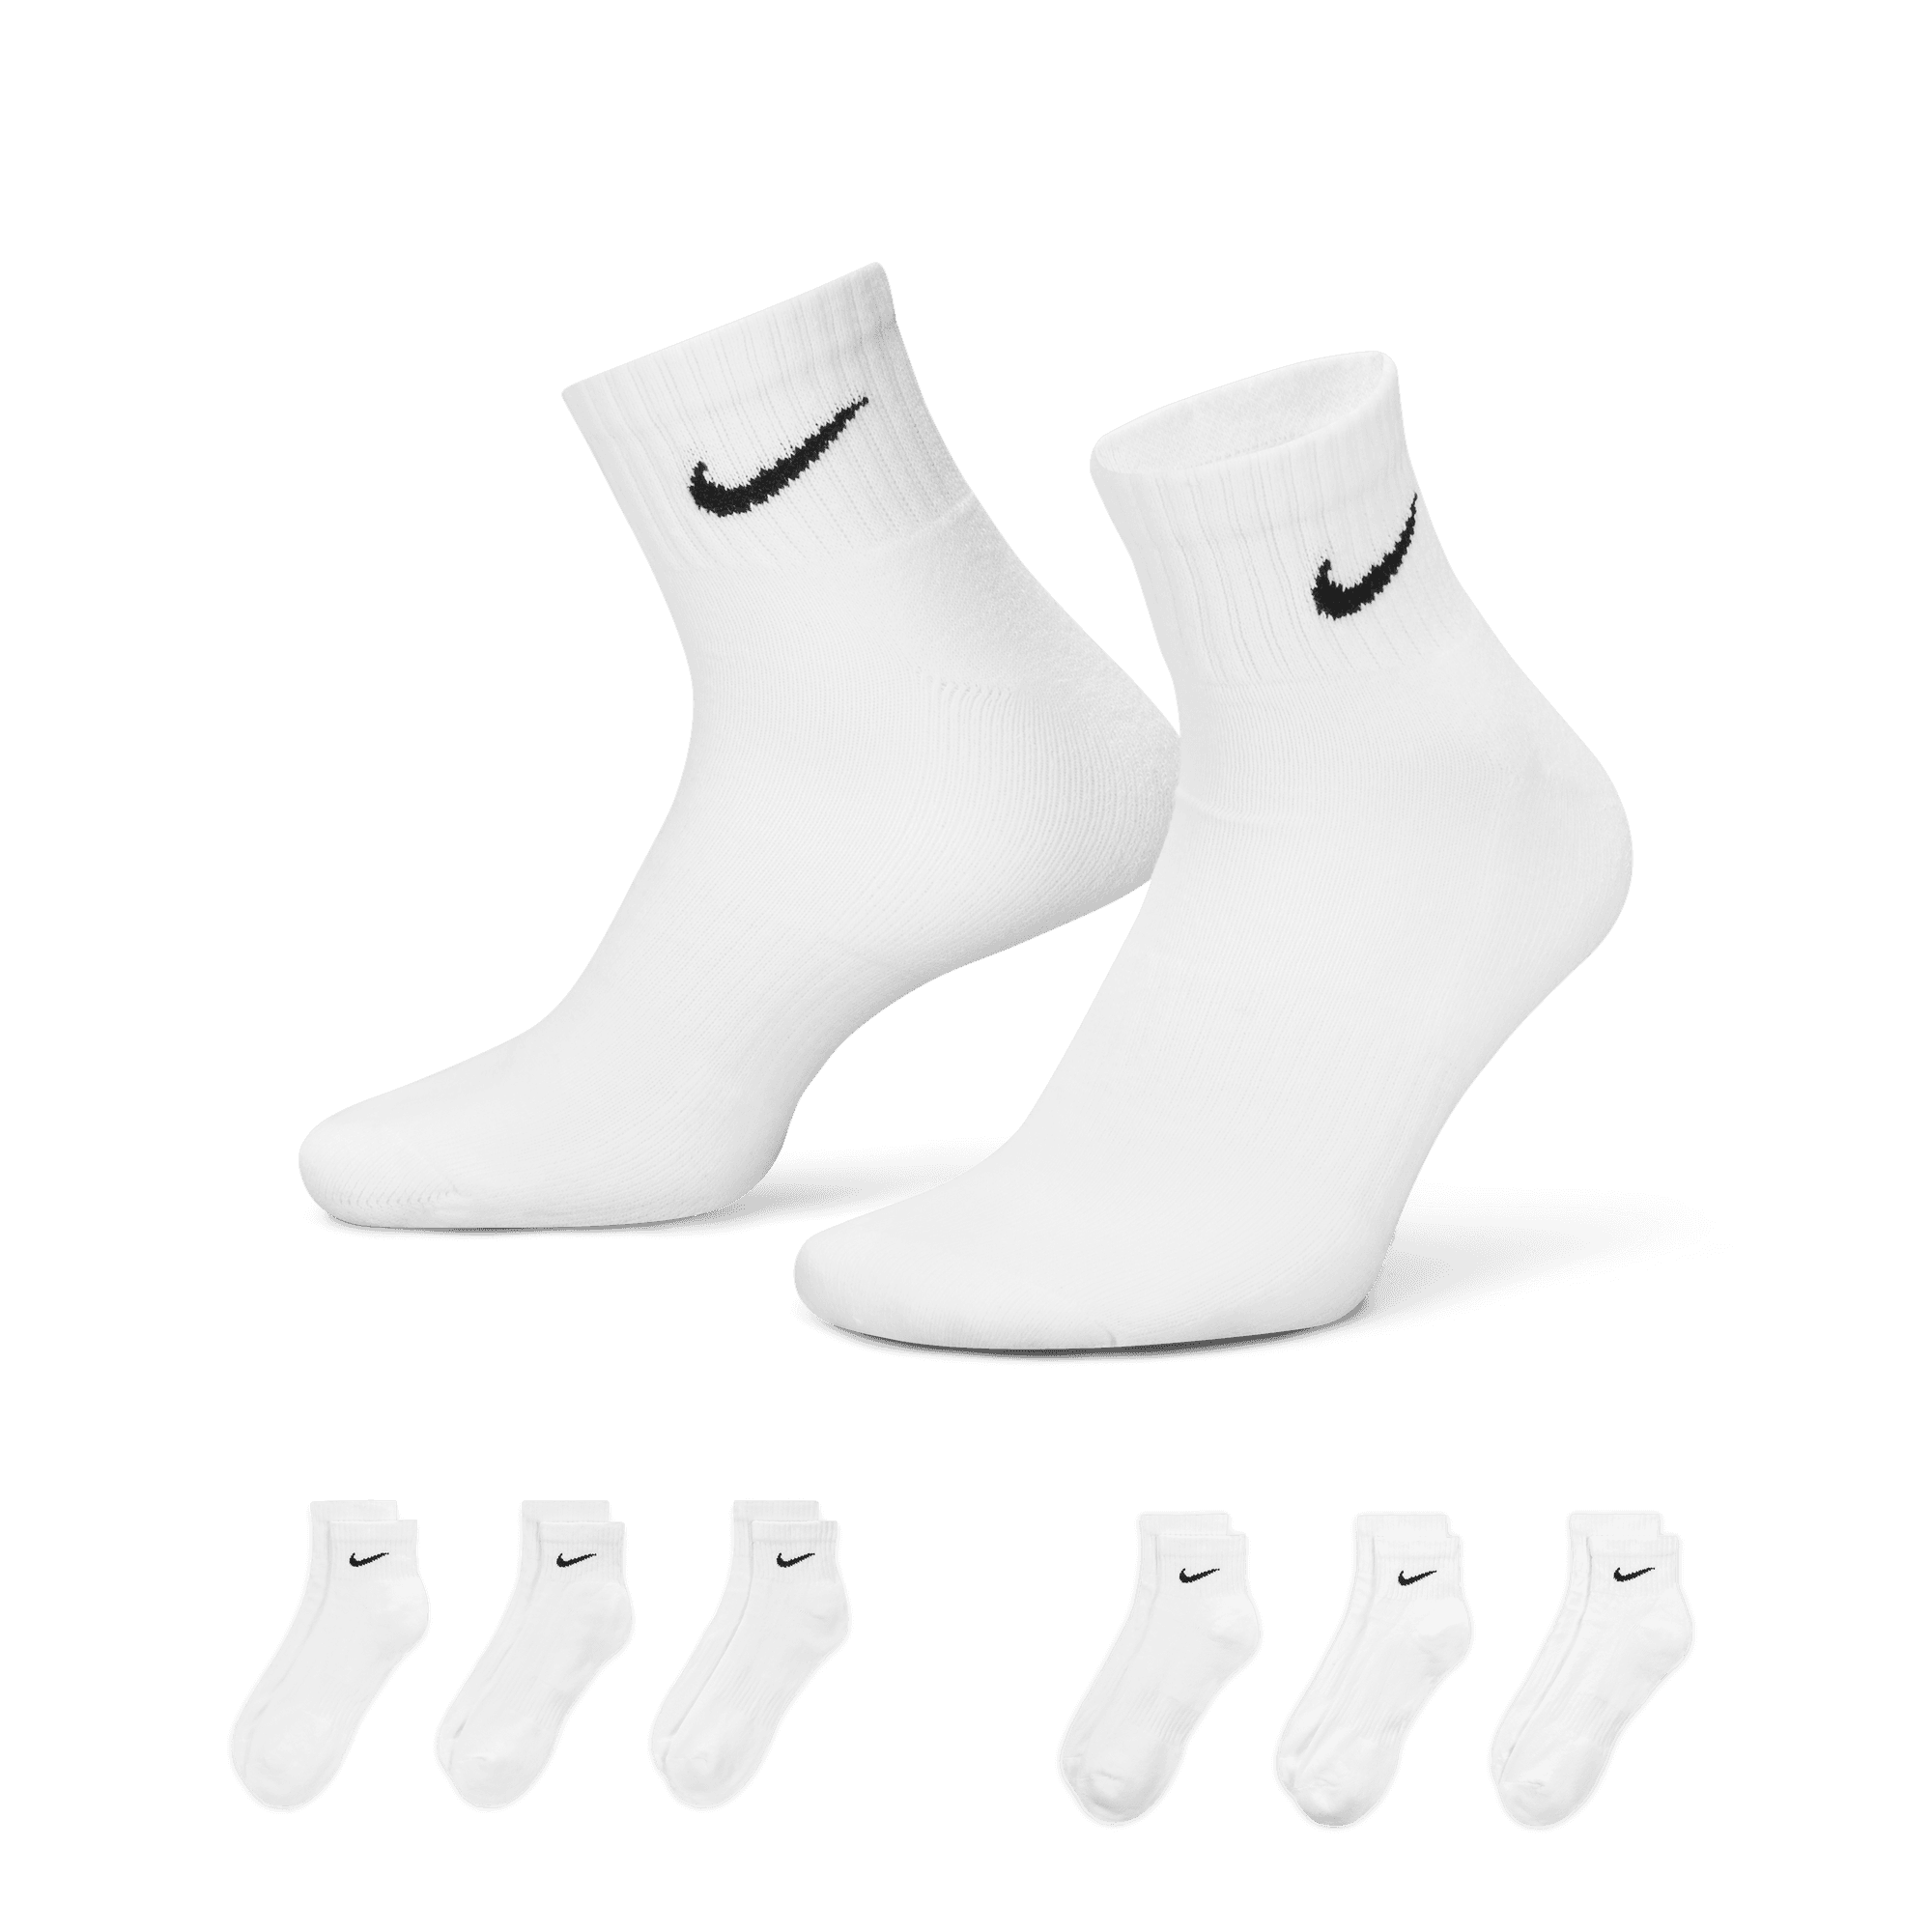 Men's Everyday Cushioned Training Ankle Sock (6 Pack) from Nike